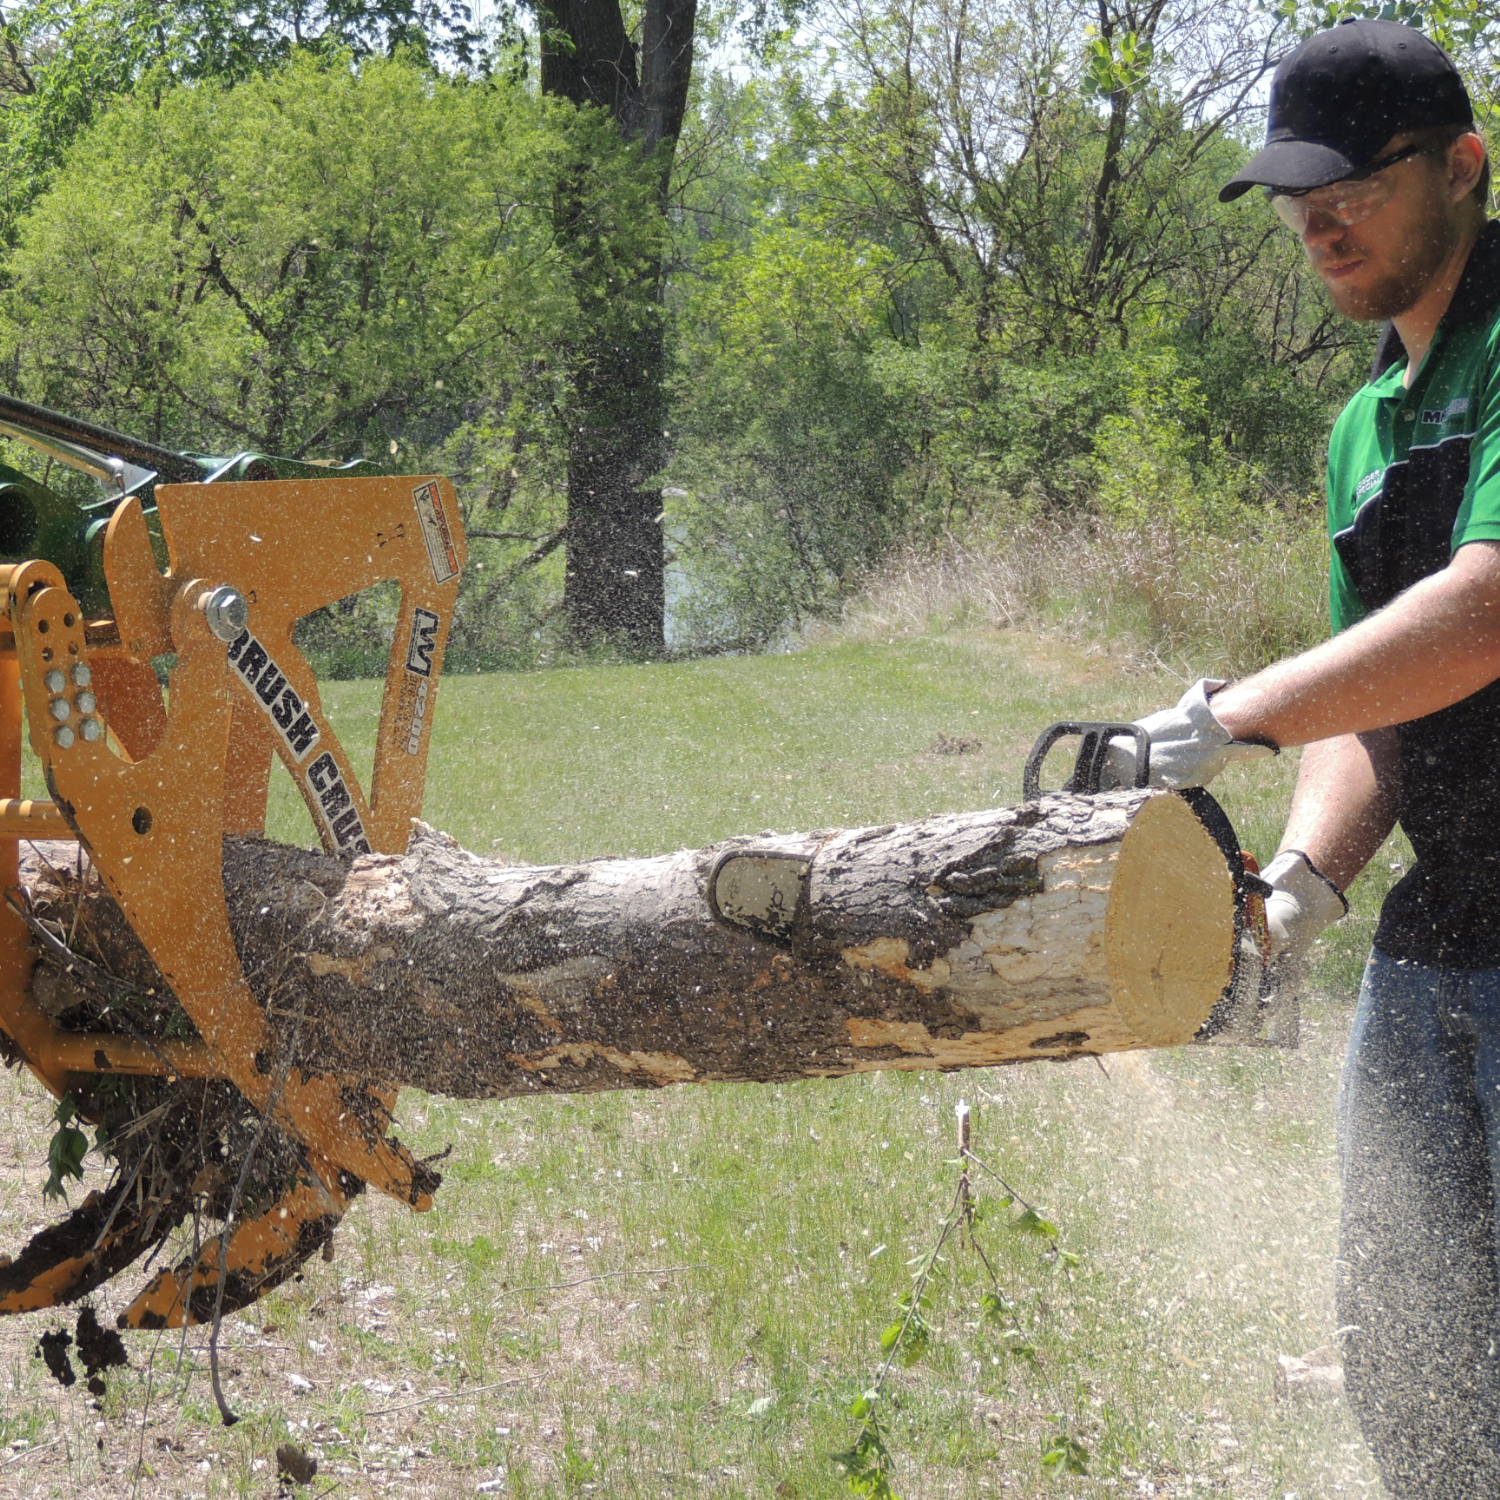 BC-4200 holds a log to be cut into firewood.